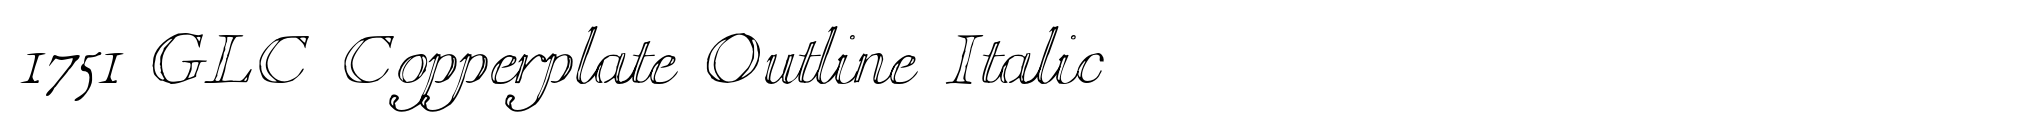 1751 GLC Copperplate Outline Italic image